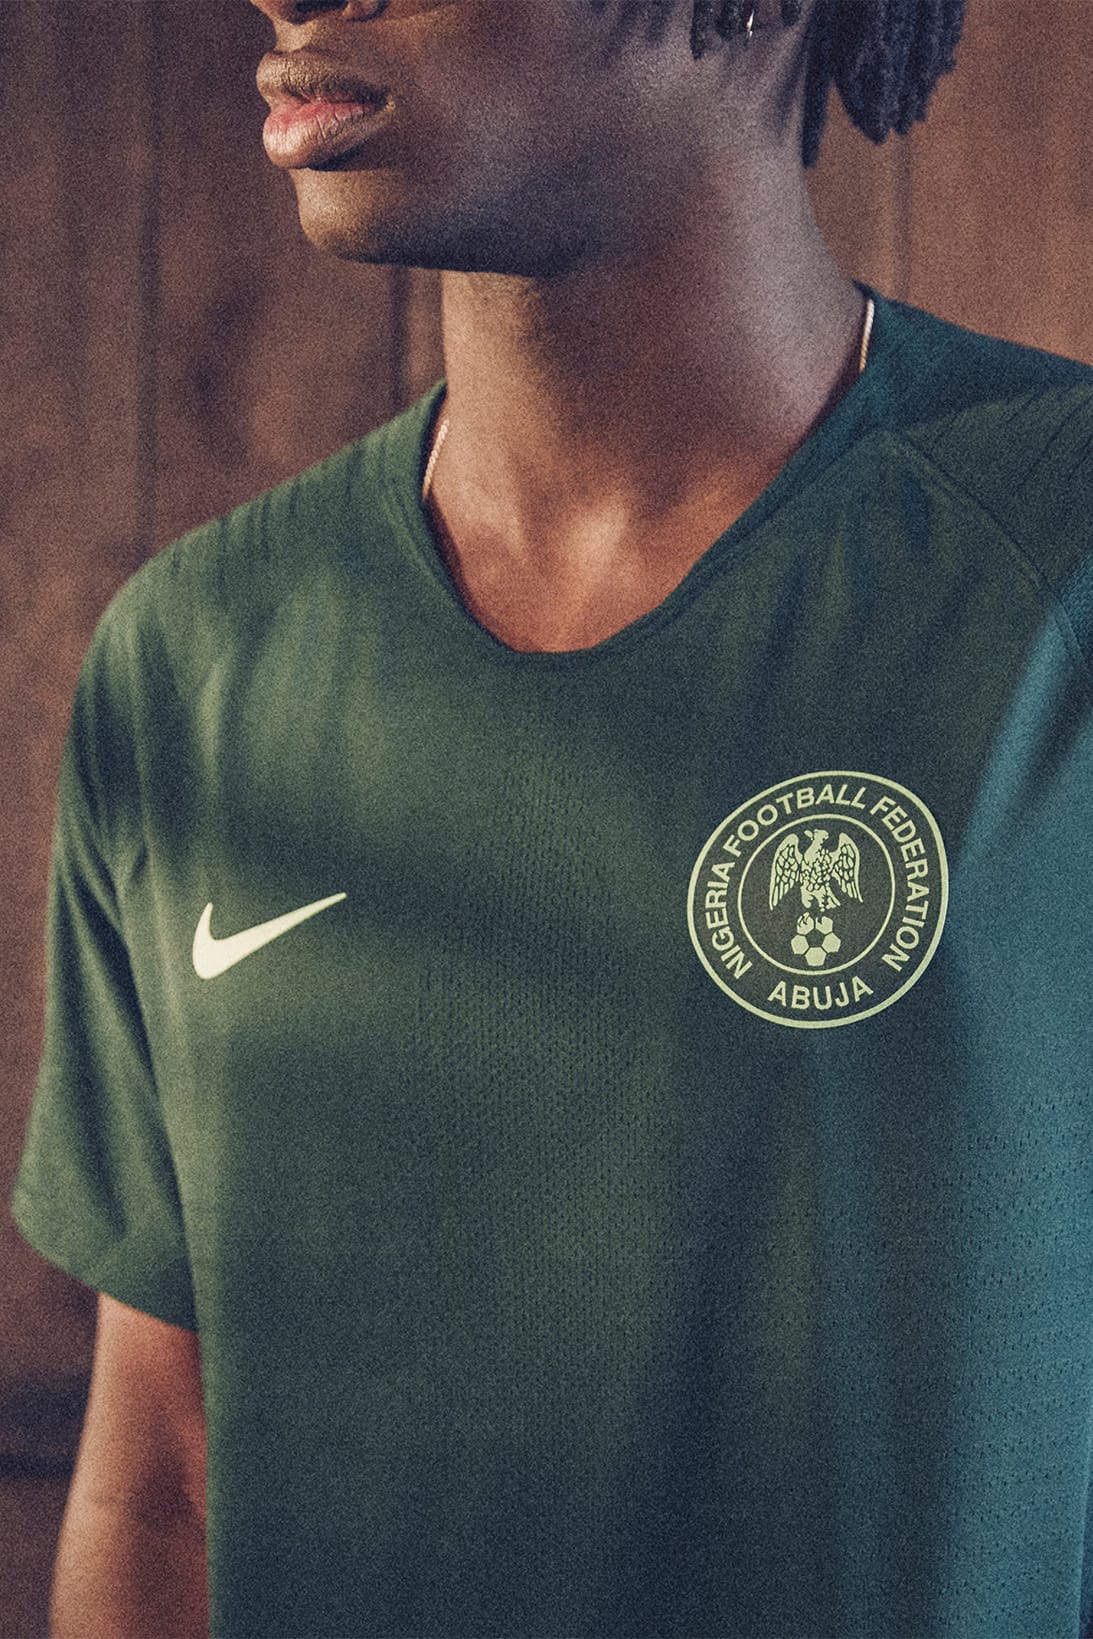 nigeria jersey 2018 for sale